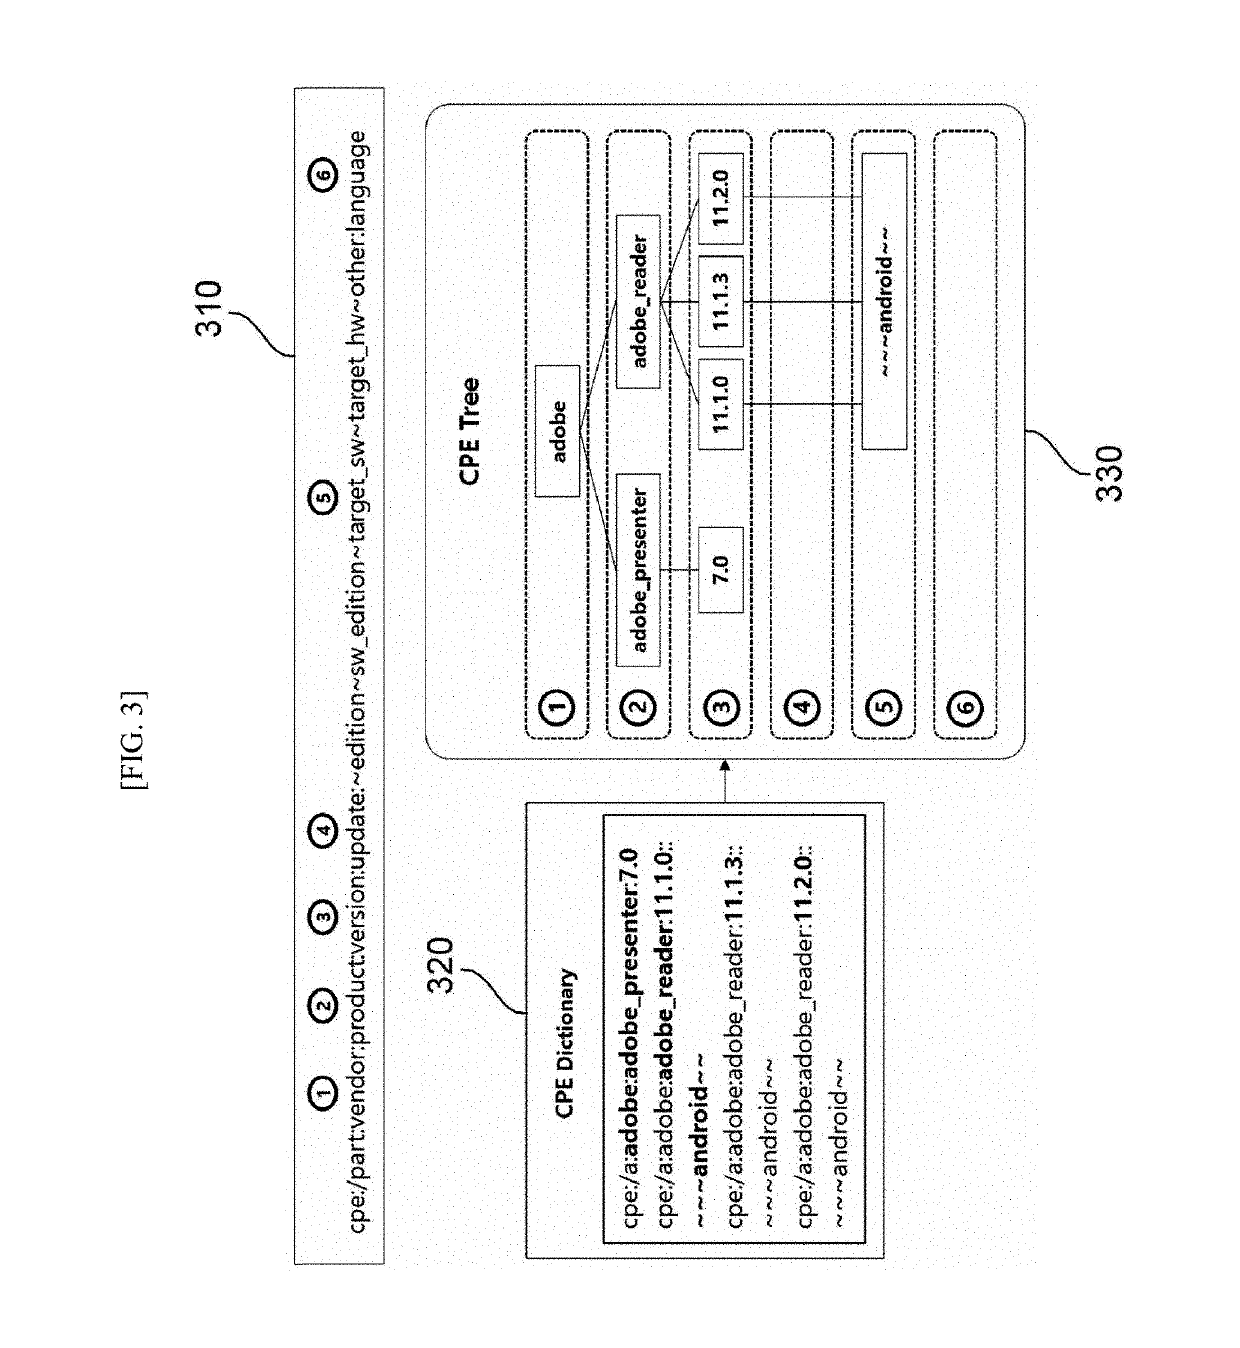 Method and apparatus for identifying vulnerability information using keyword analysis for banner of open port